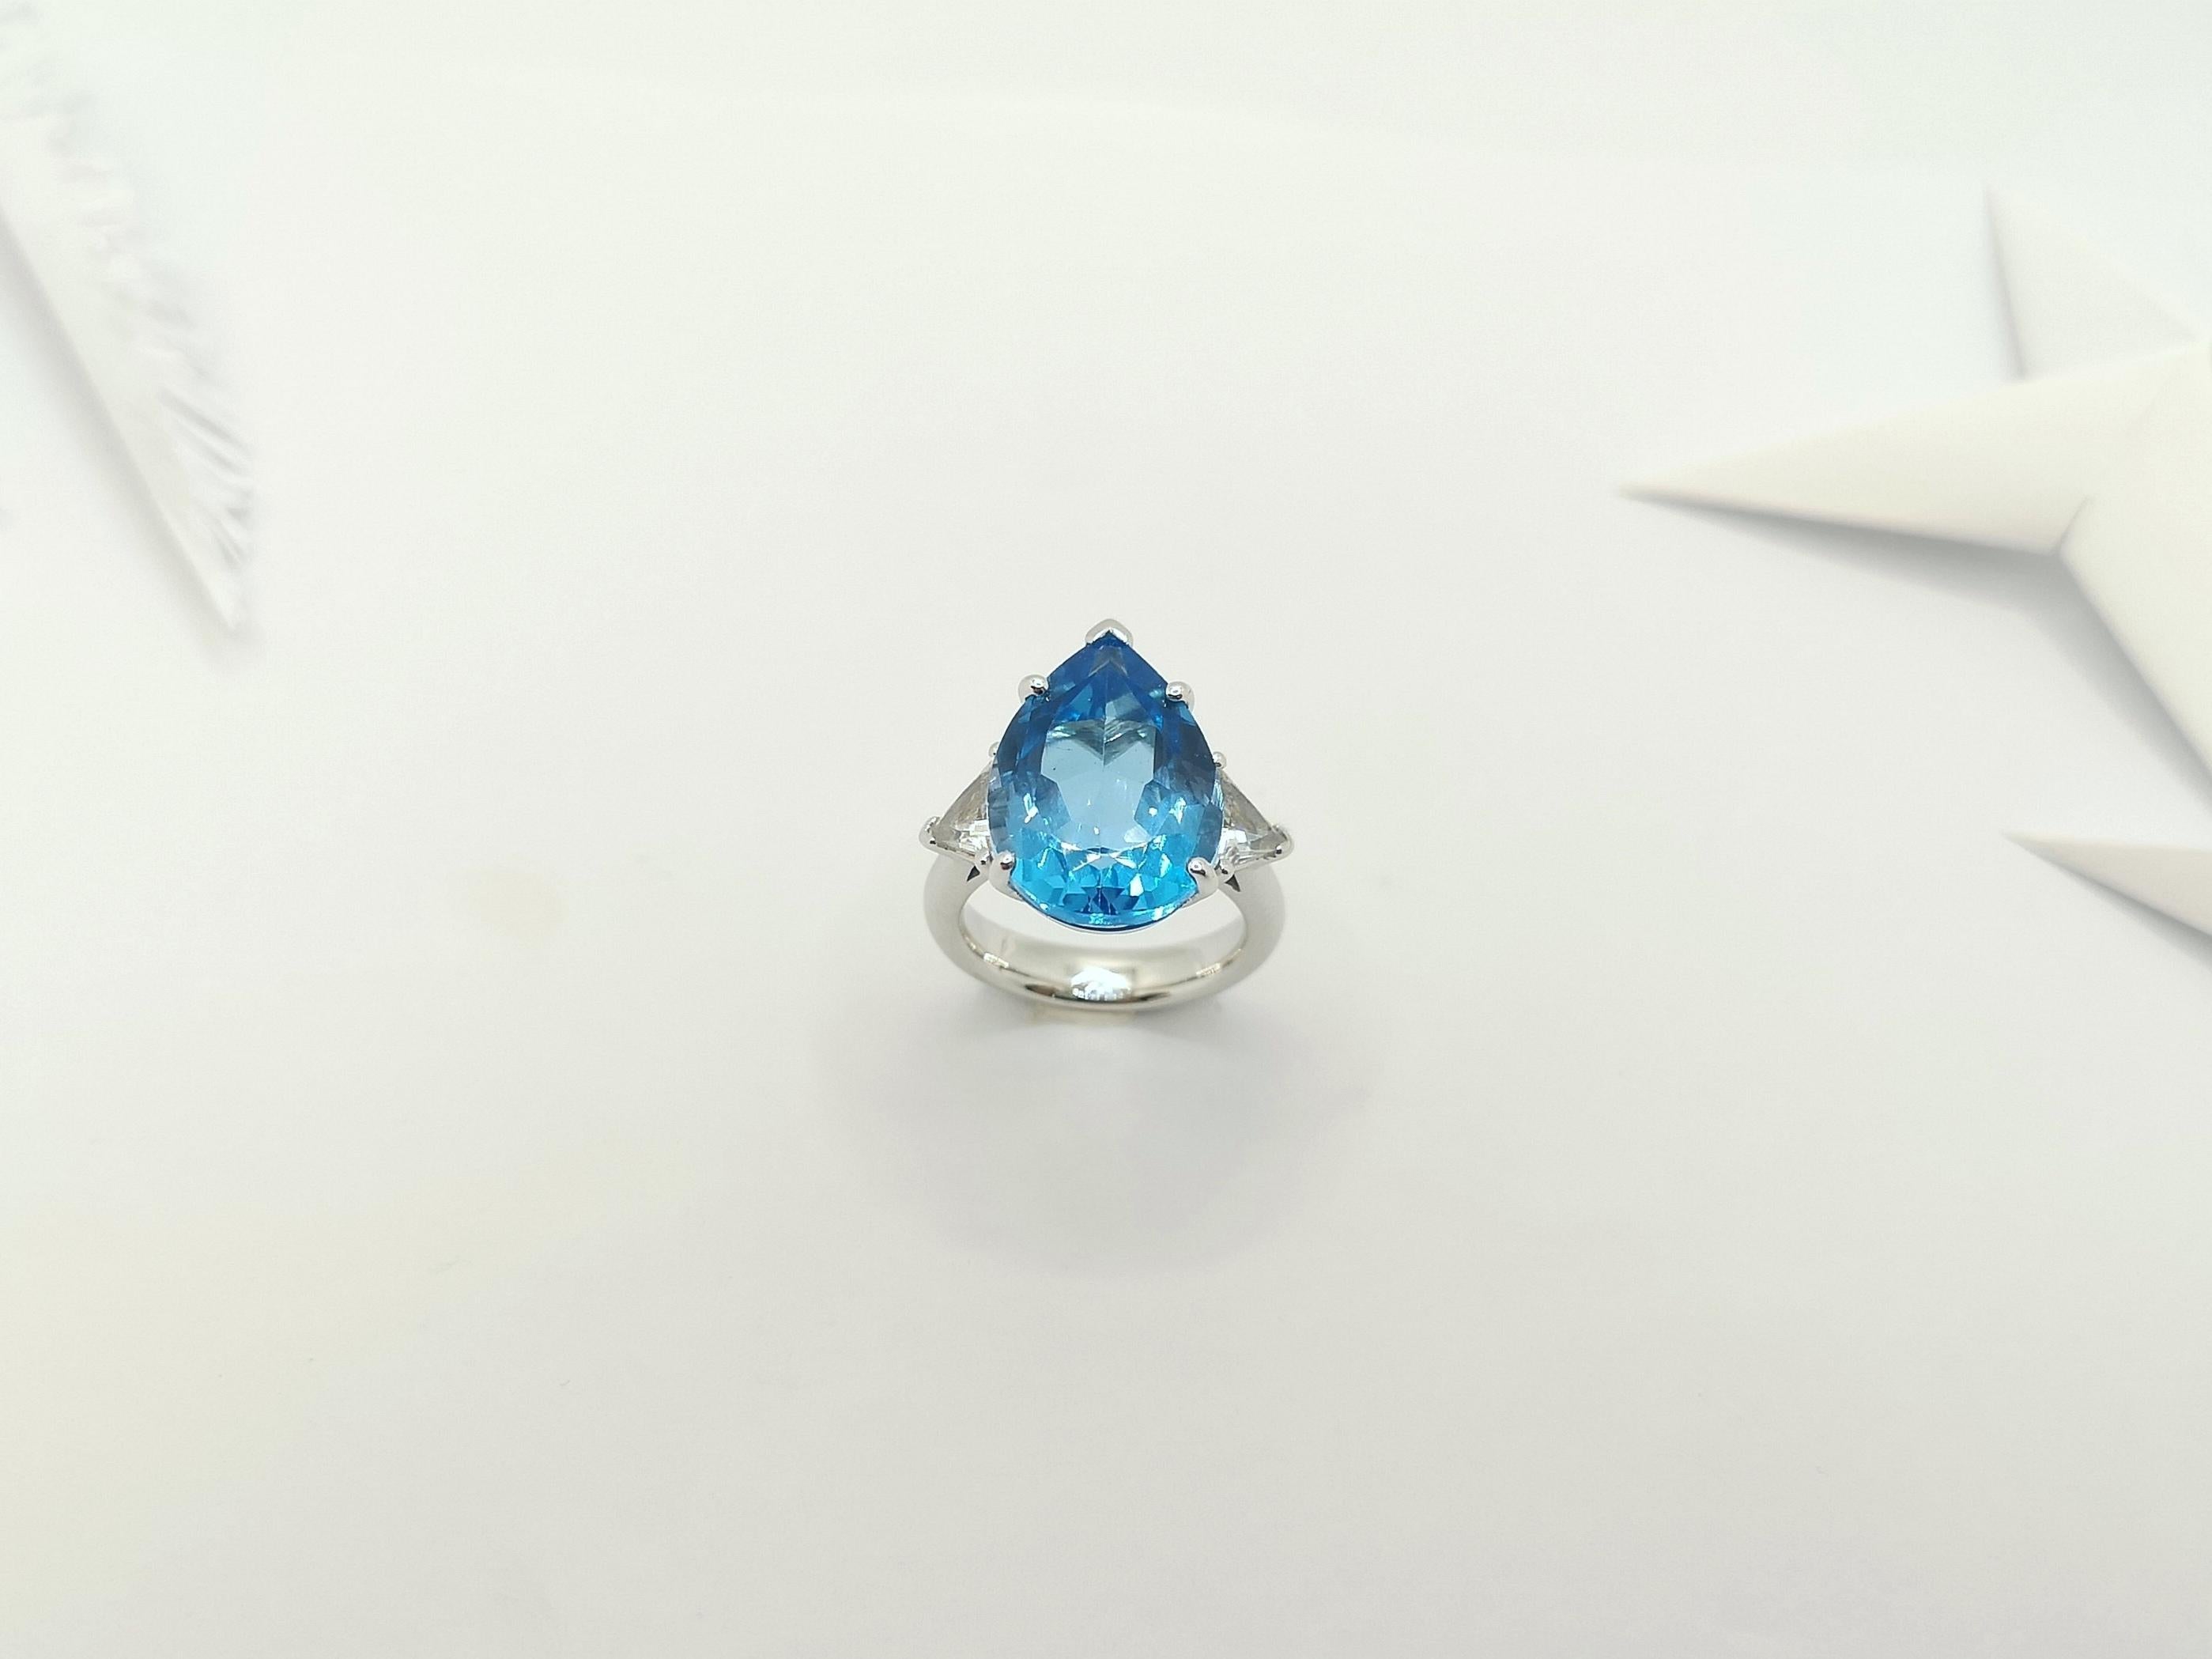 Blue Topaz 15.25 carats with White Topaz 1.51 carats Ring set in 18 Karat White Gold Settings

Width:  2.1 cm 
Length: 1.7 cm
Ring Size: 54
Total Weight: 13.4 grams

